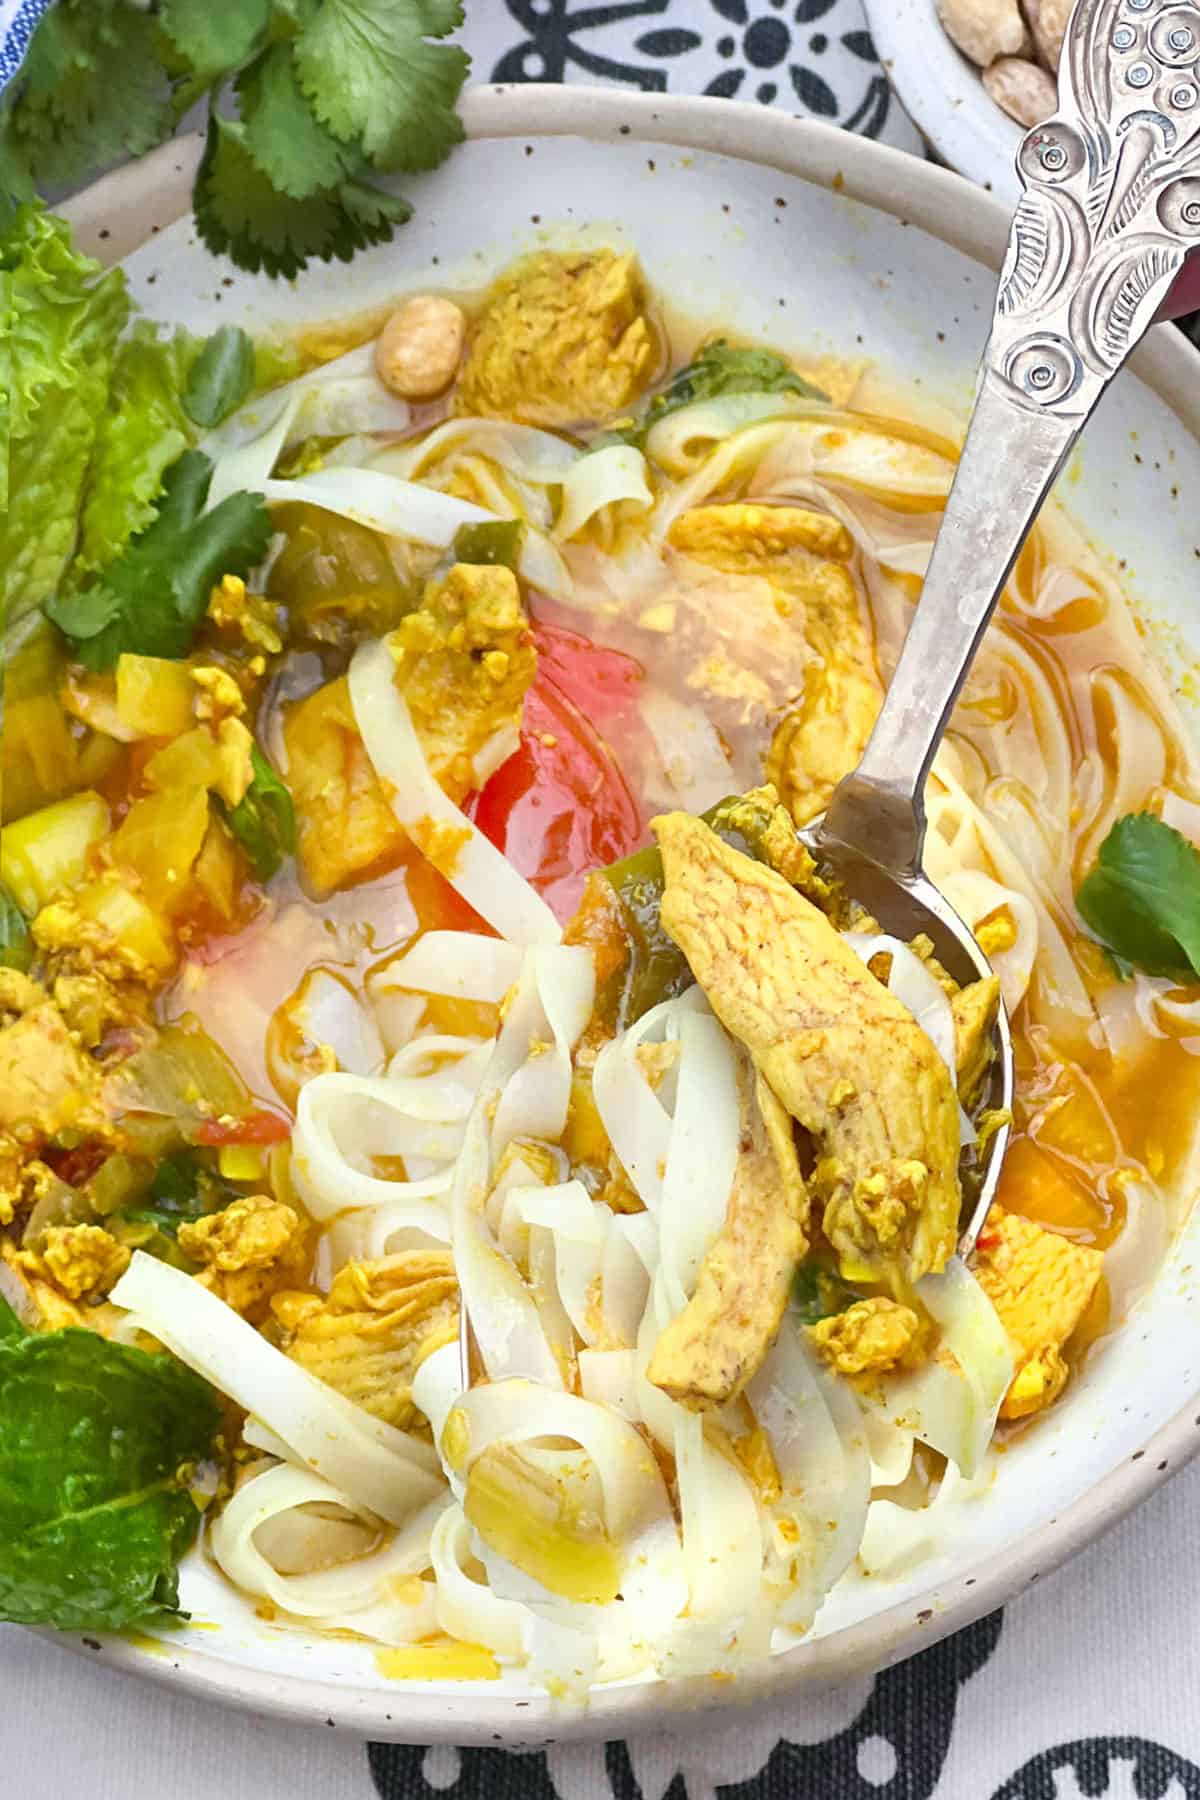 Bowl of noodles and chicken with herbs and lettuce topped with peanuts, a spoon scooping some of the chicken and noodles.